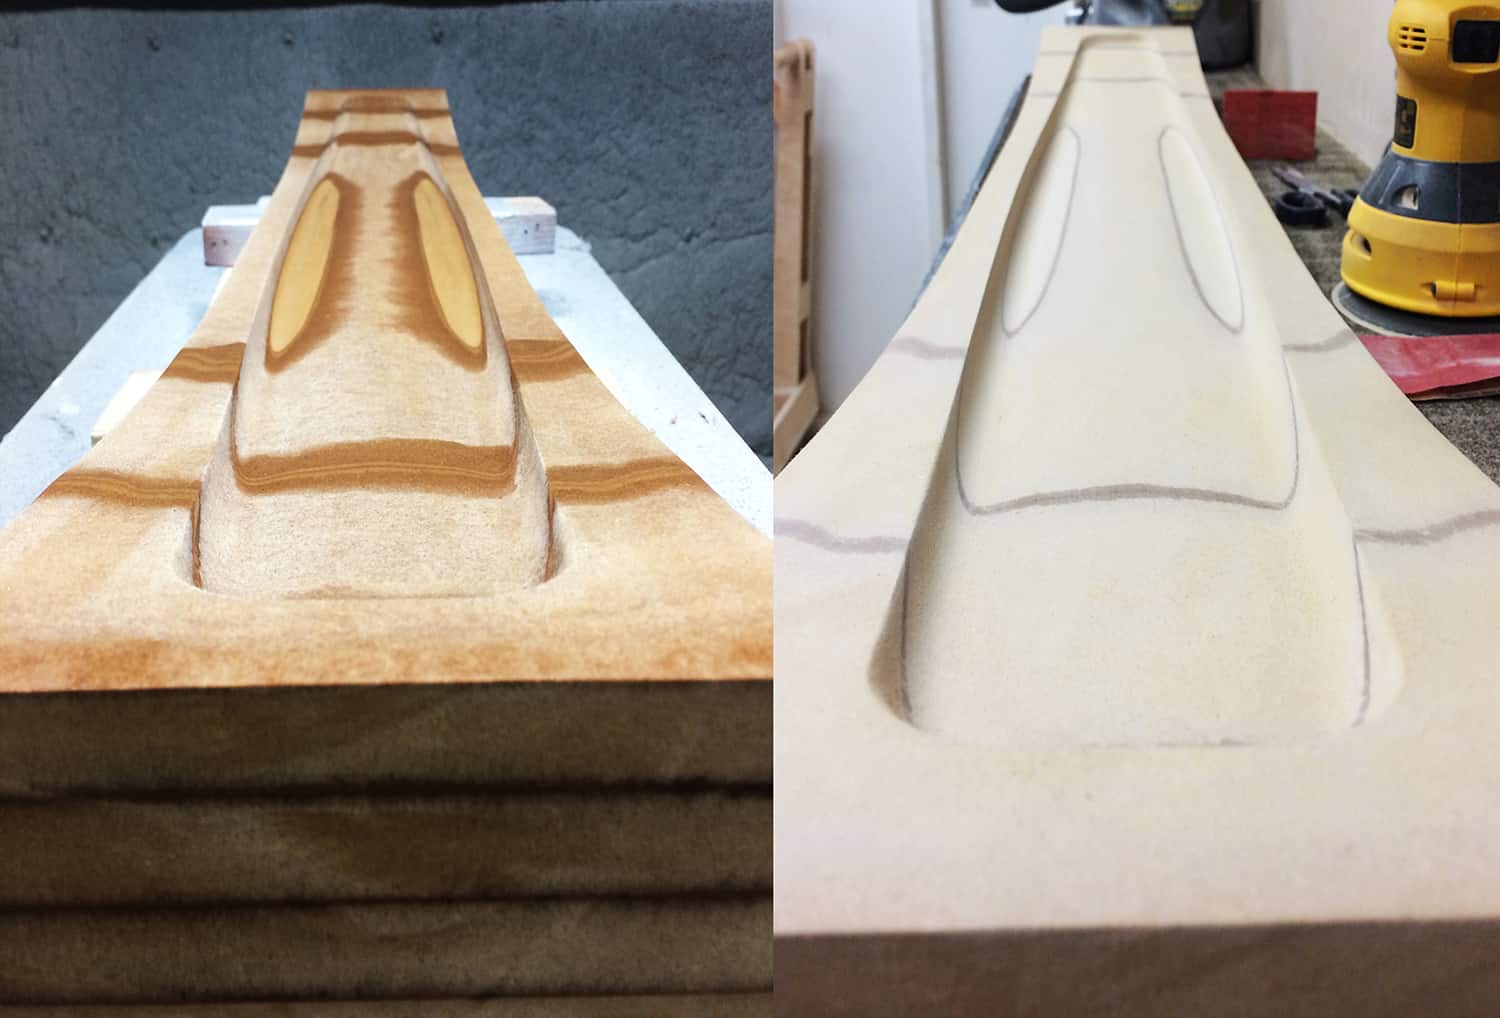 wooden mold for youth slalom skis.